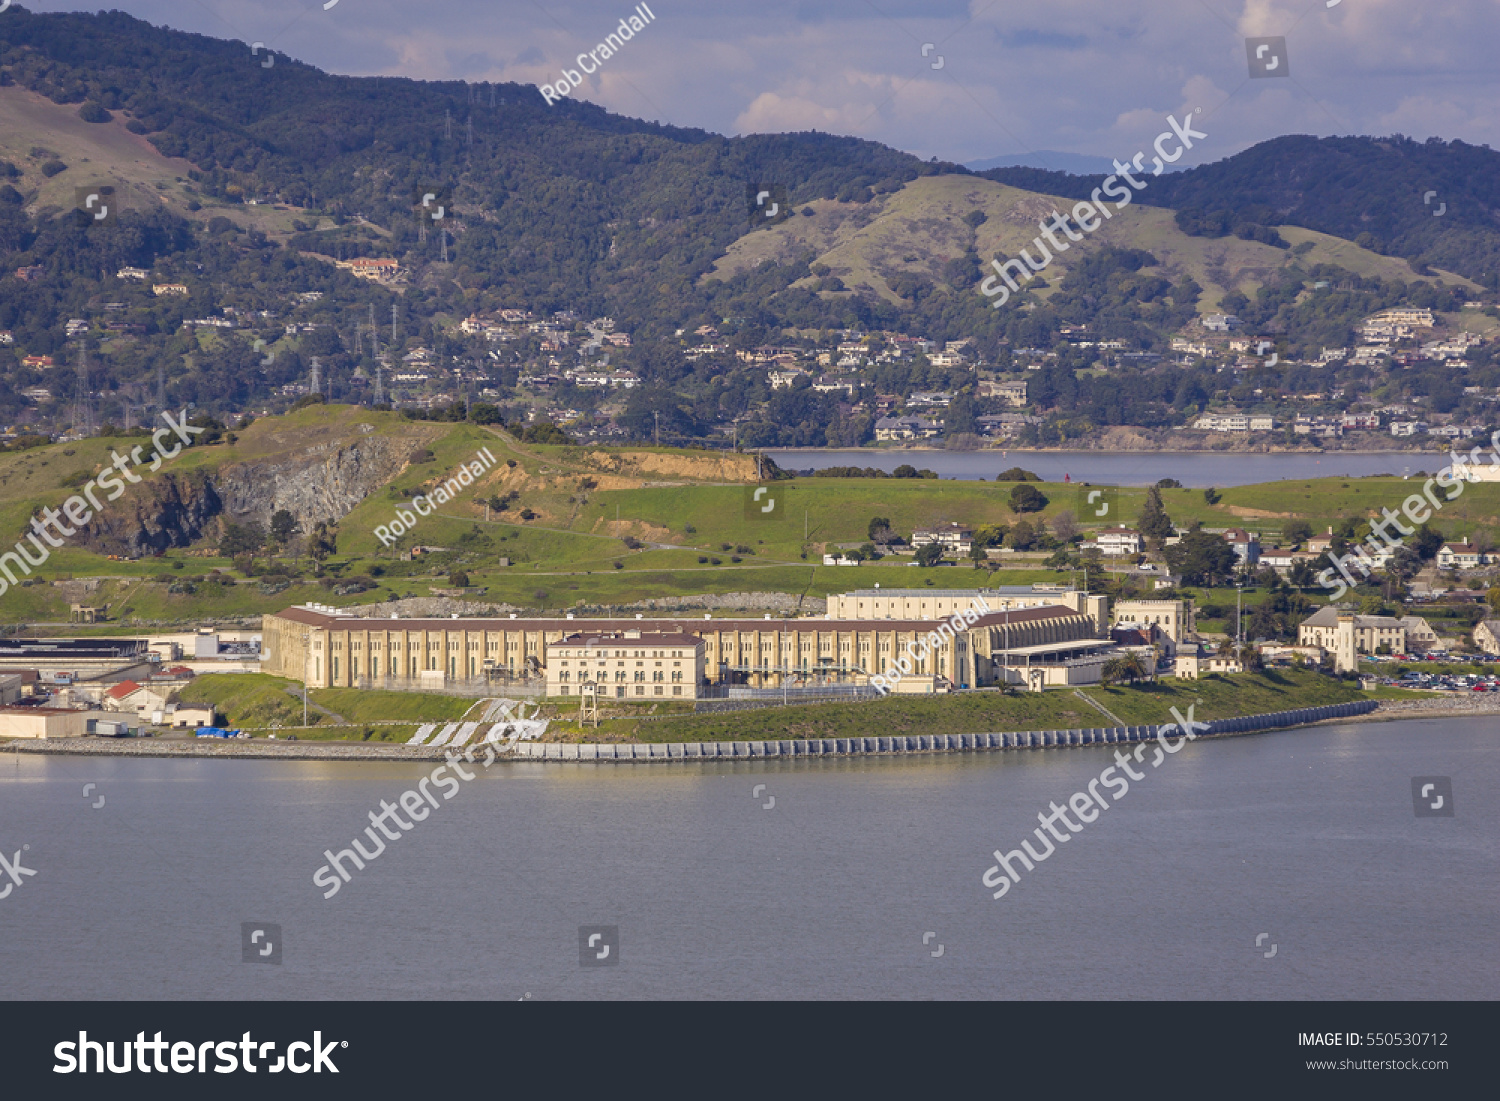 San Quentin State Prison aerial view poster 